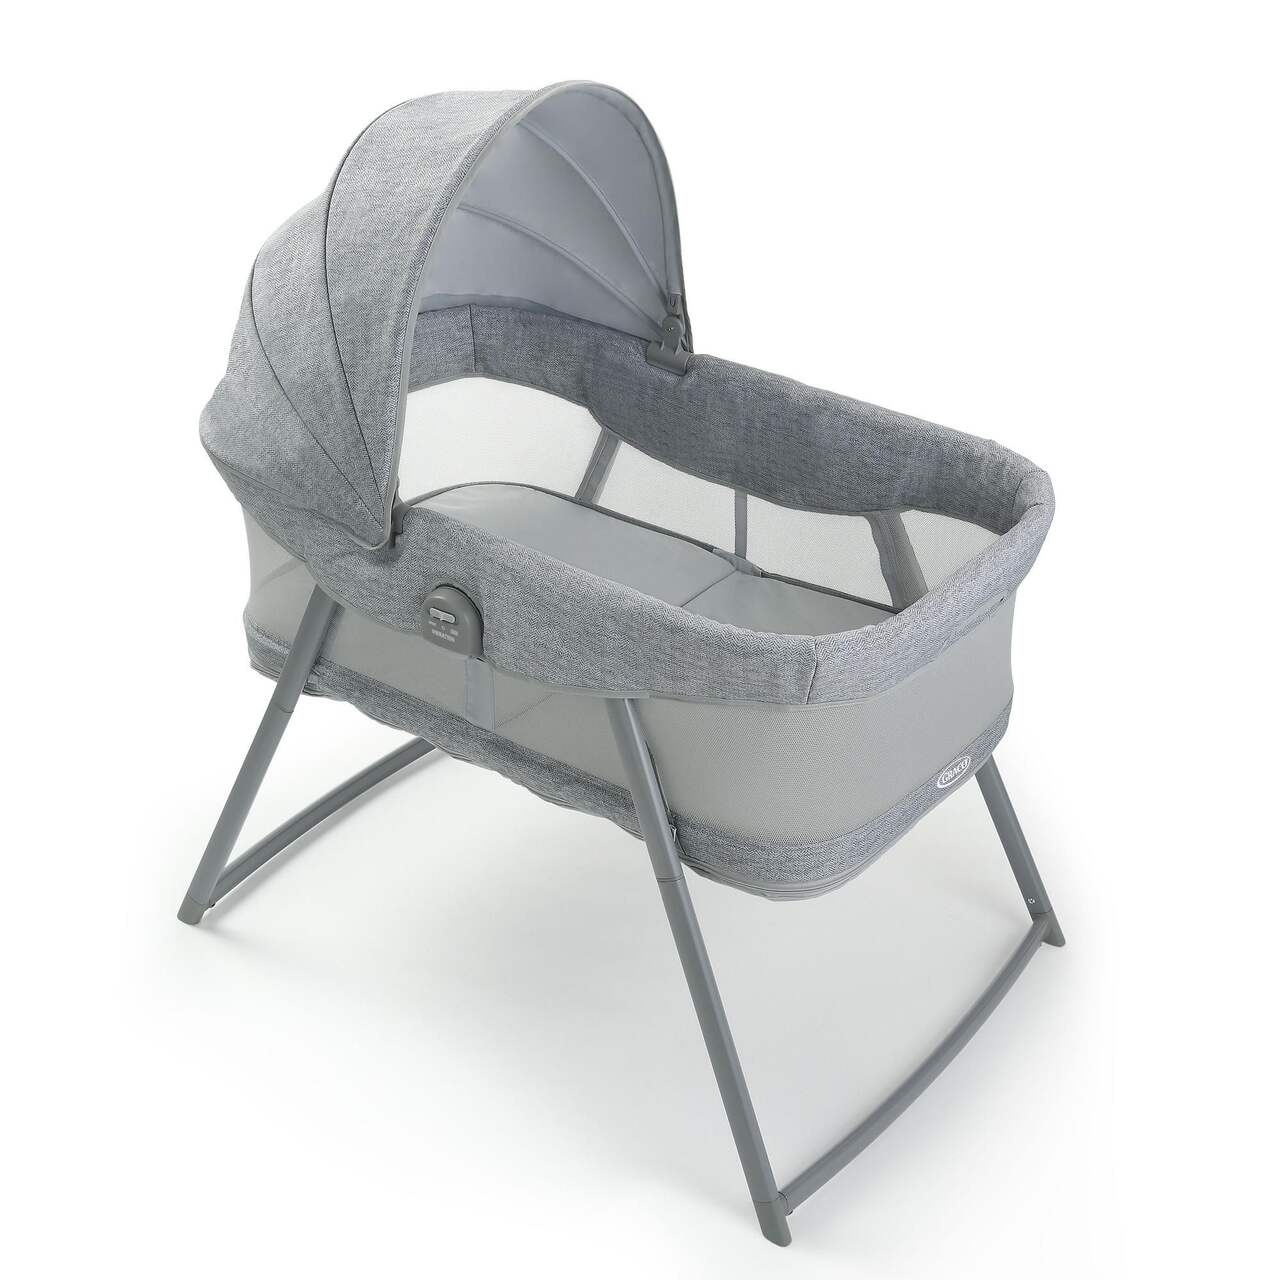 SUPPORT COUFFIN SANS ROULETTES – Baby Concept